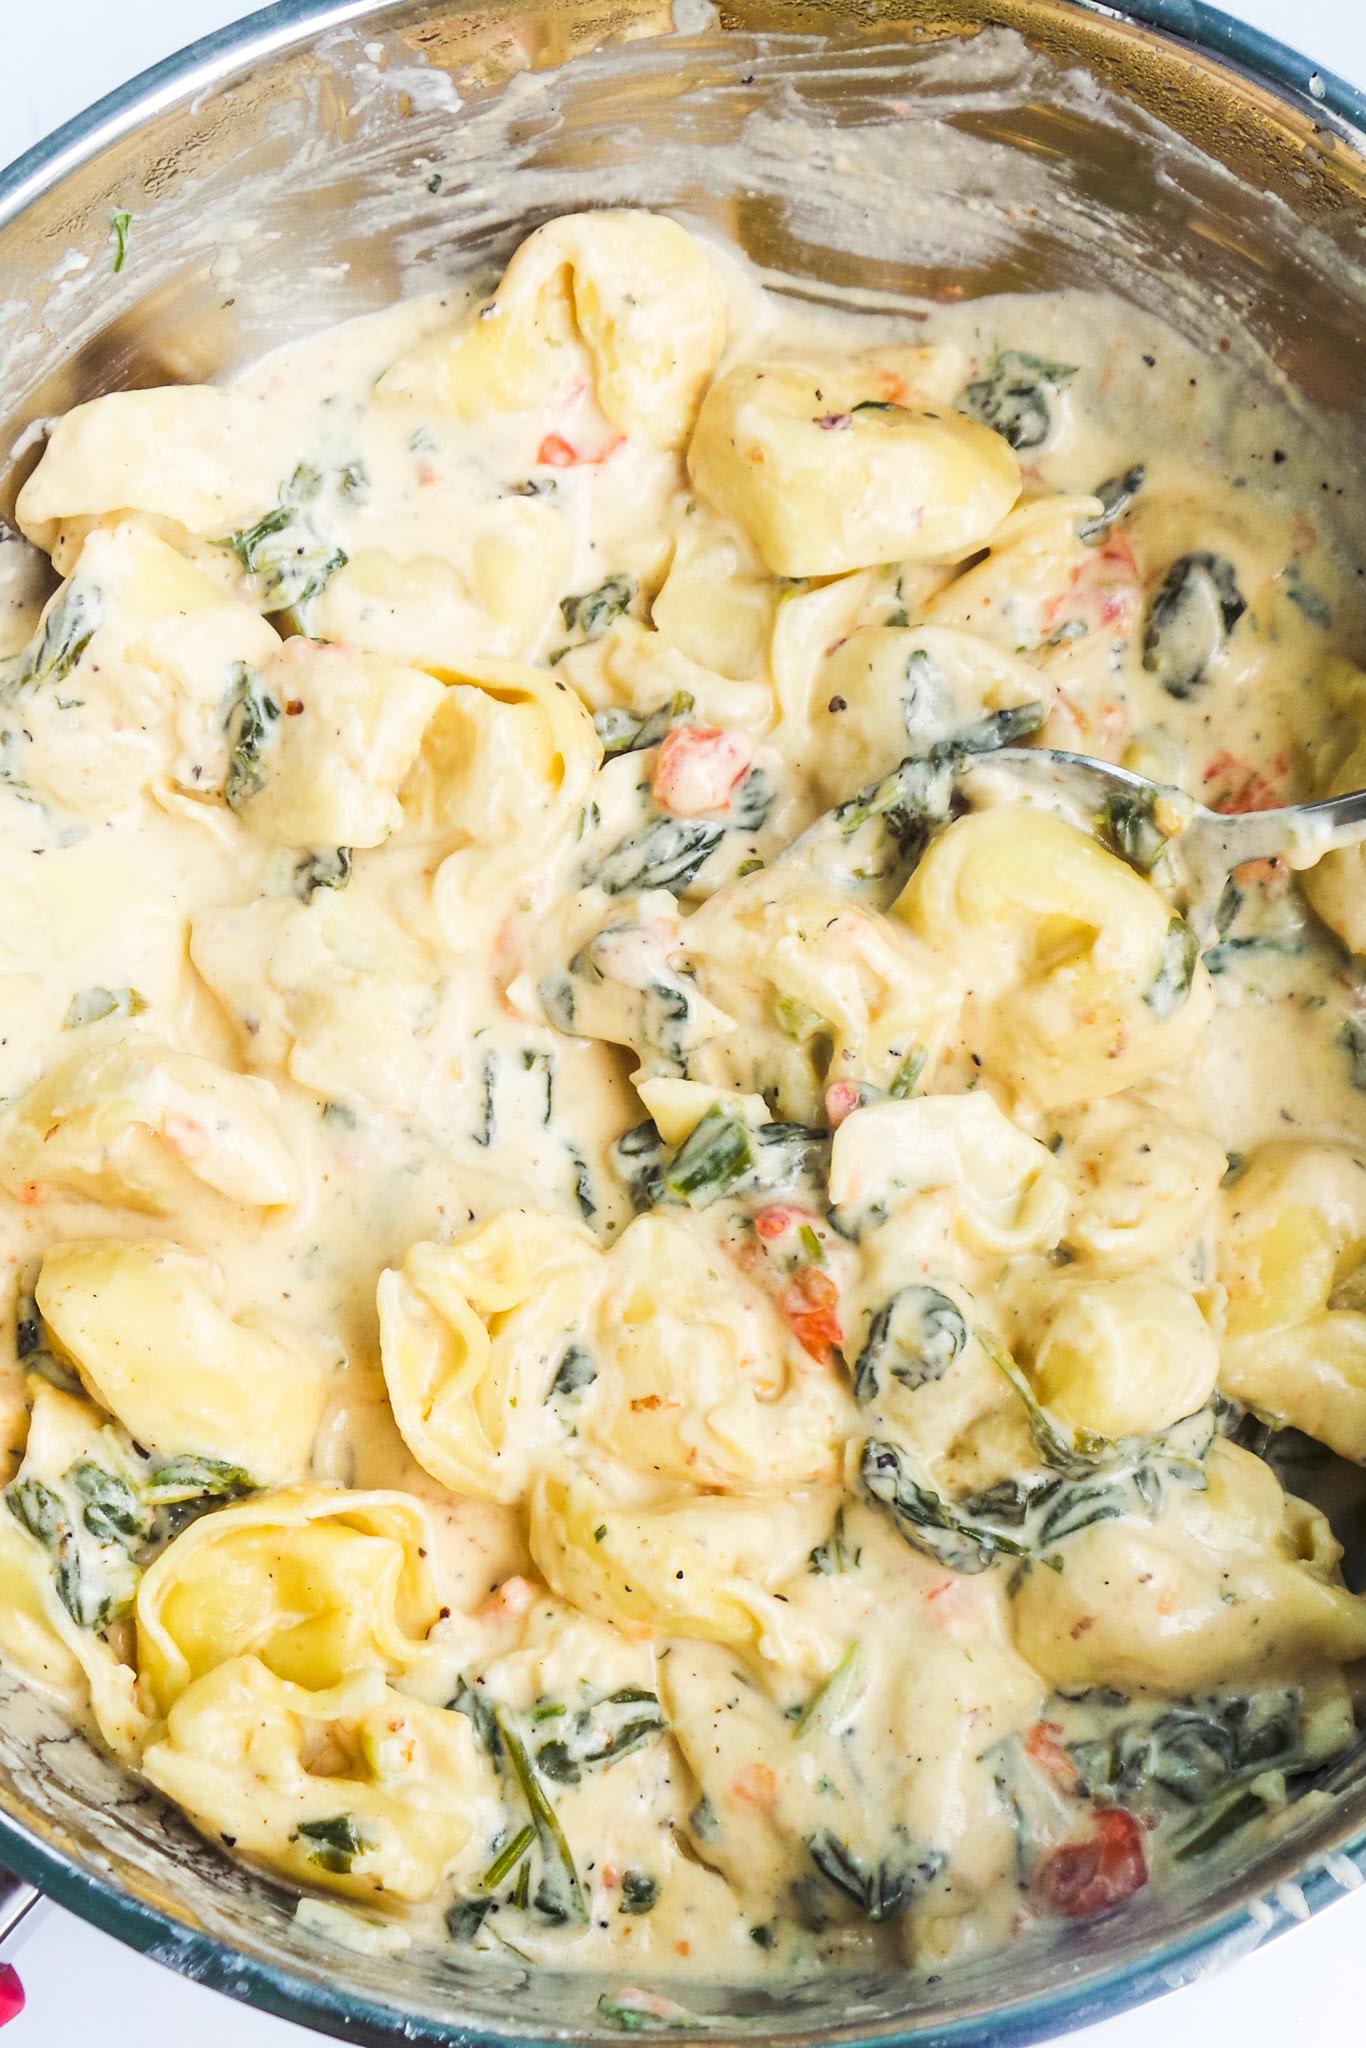 Easy creamy tortellini recipe - super delicious! This tortellini recipe is one of the best dinners I've ever had - creamy, satisfying and I only needed 30 minutes and a pan to make it!